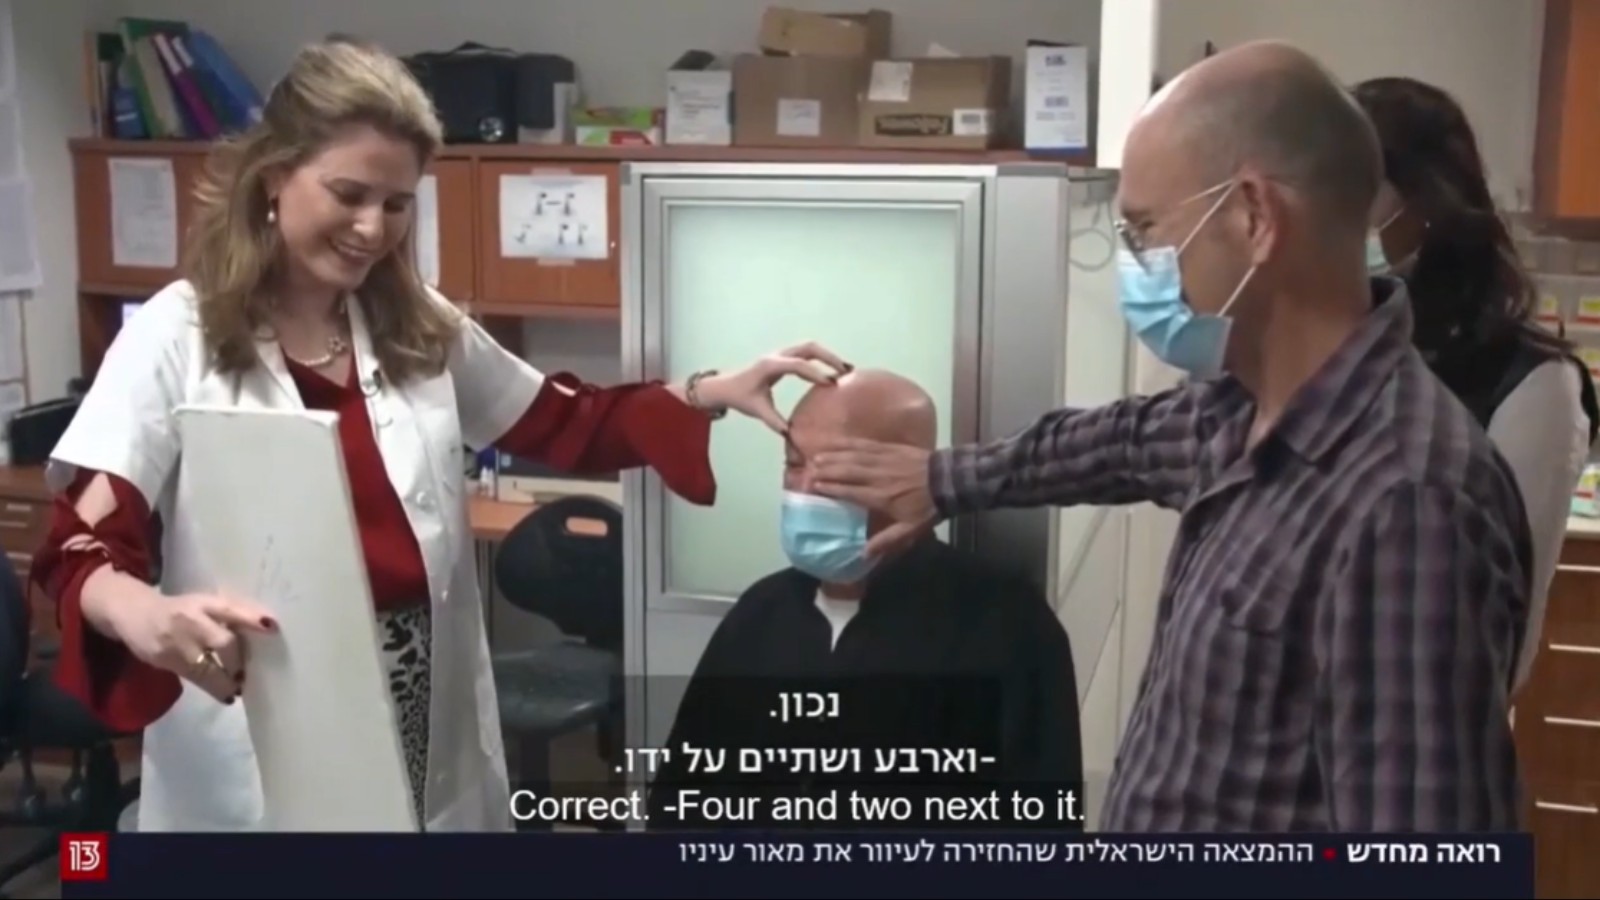 Jamal Furani reading a vision chart a day after receiving the KPro artificial cornea from CorNeat, surrounded by his surgeon, Dr. Irit Bahar, CorNeat cofounder Dr. Gilad Litvin and Furani’s daughter Khulud. Screenshot from Channel 13